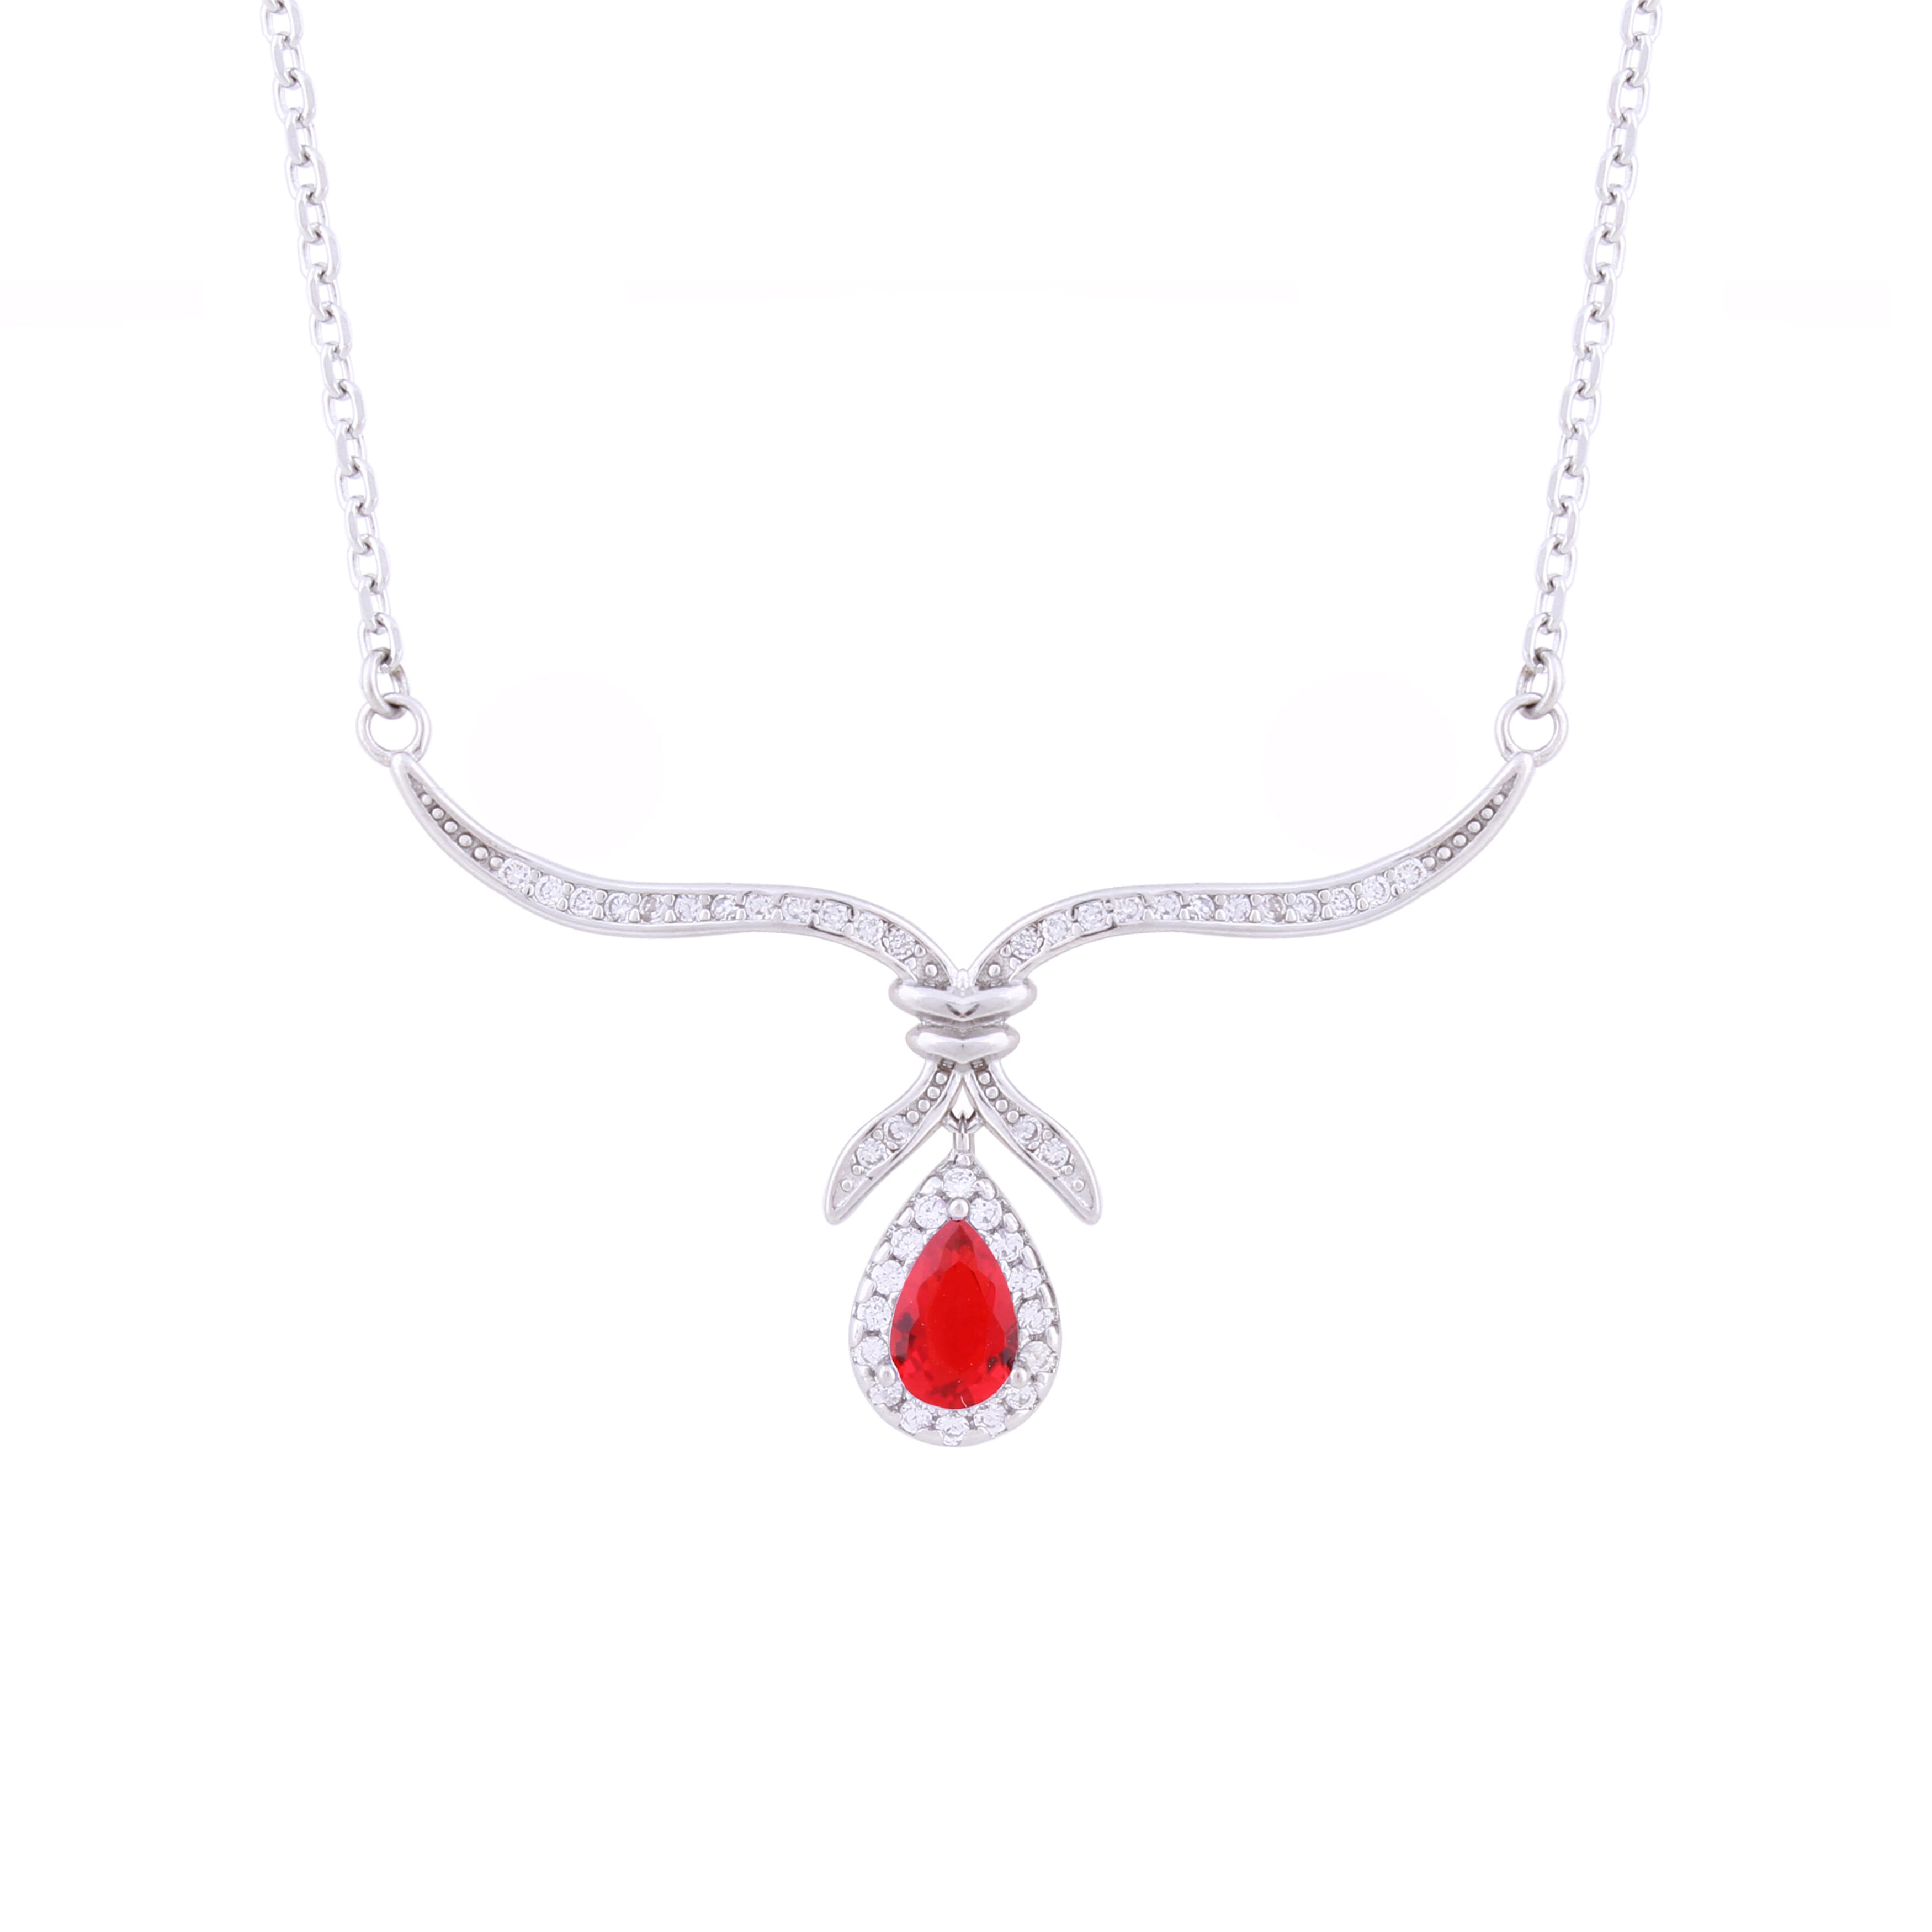 Asfour Crystal 925 Sterling Silver Chain Necklace With Red Stone